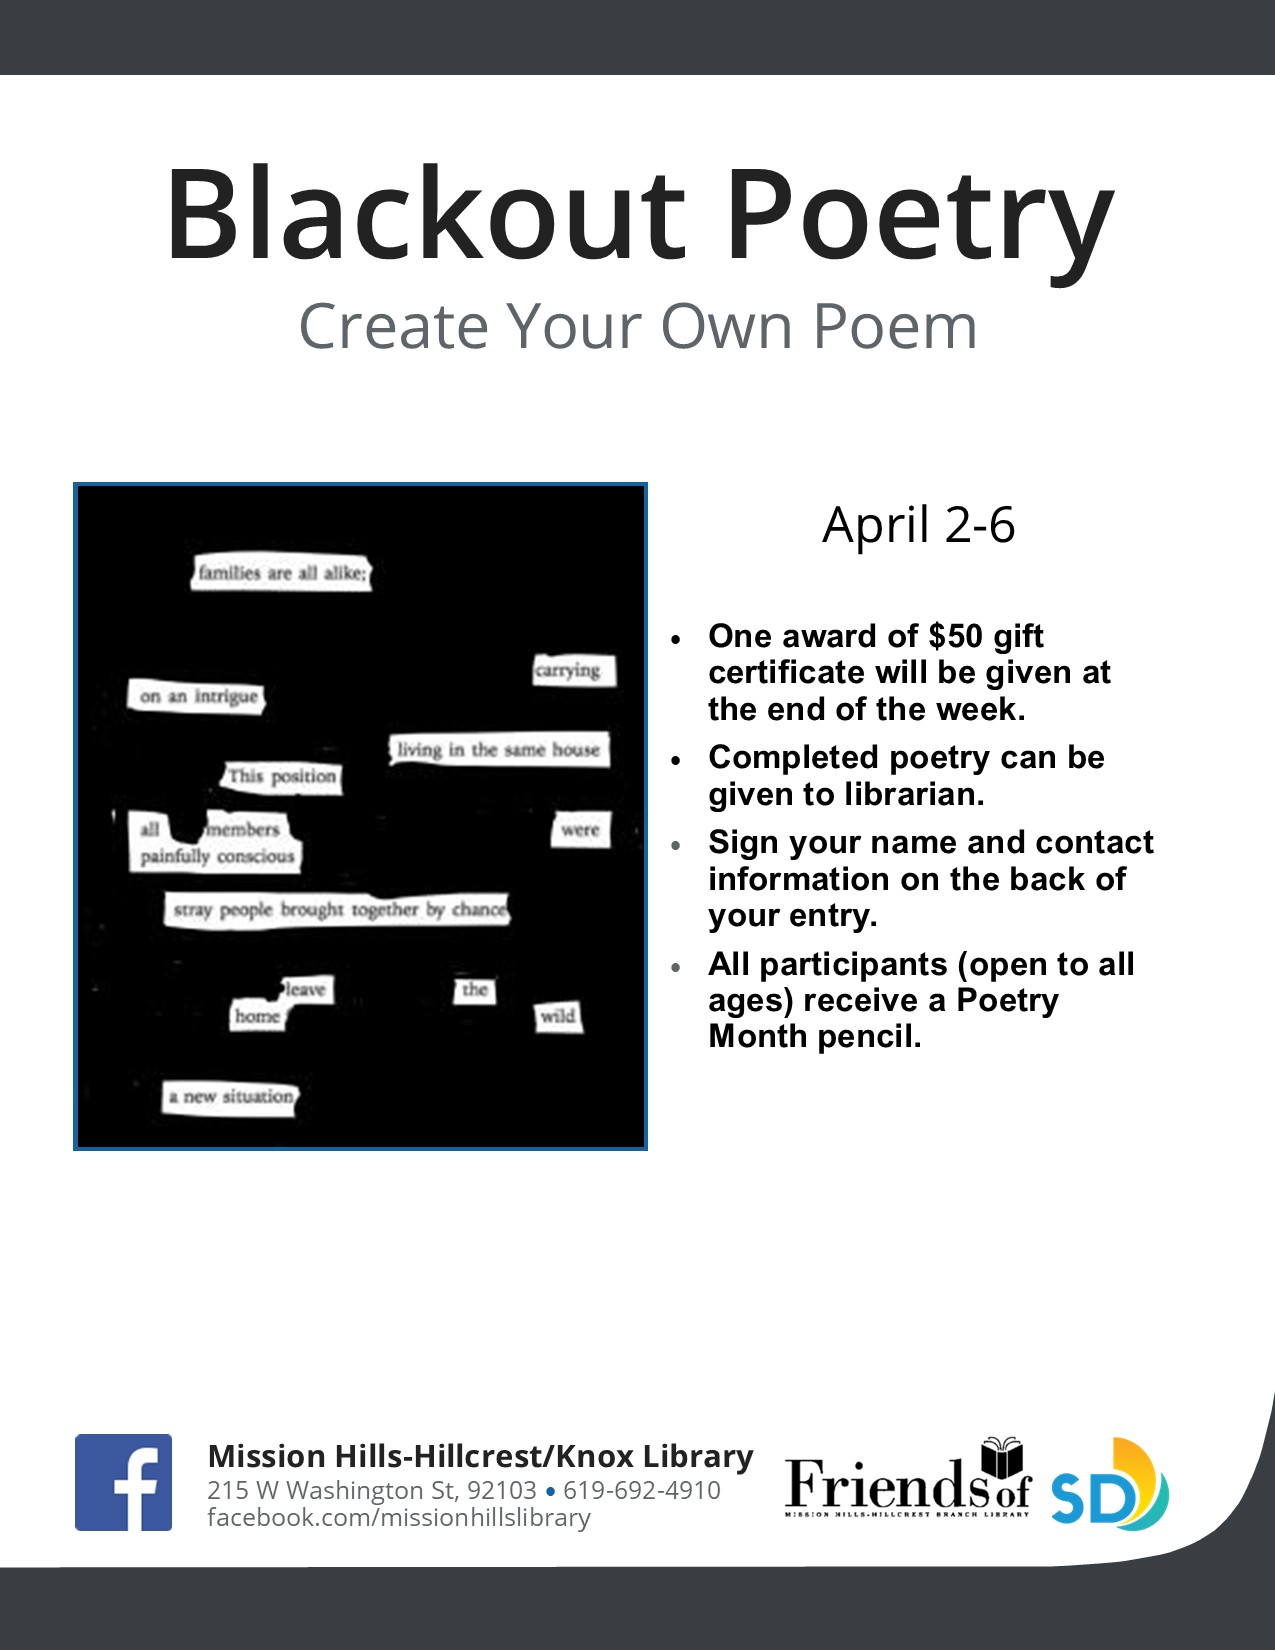 Flyer with details of blackout poetry and sample poem